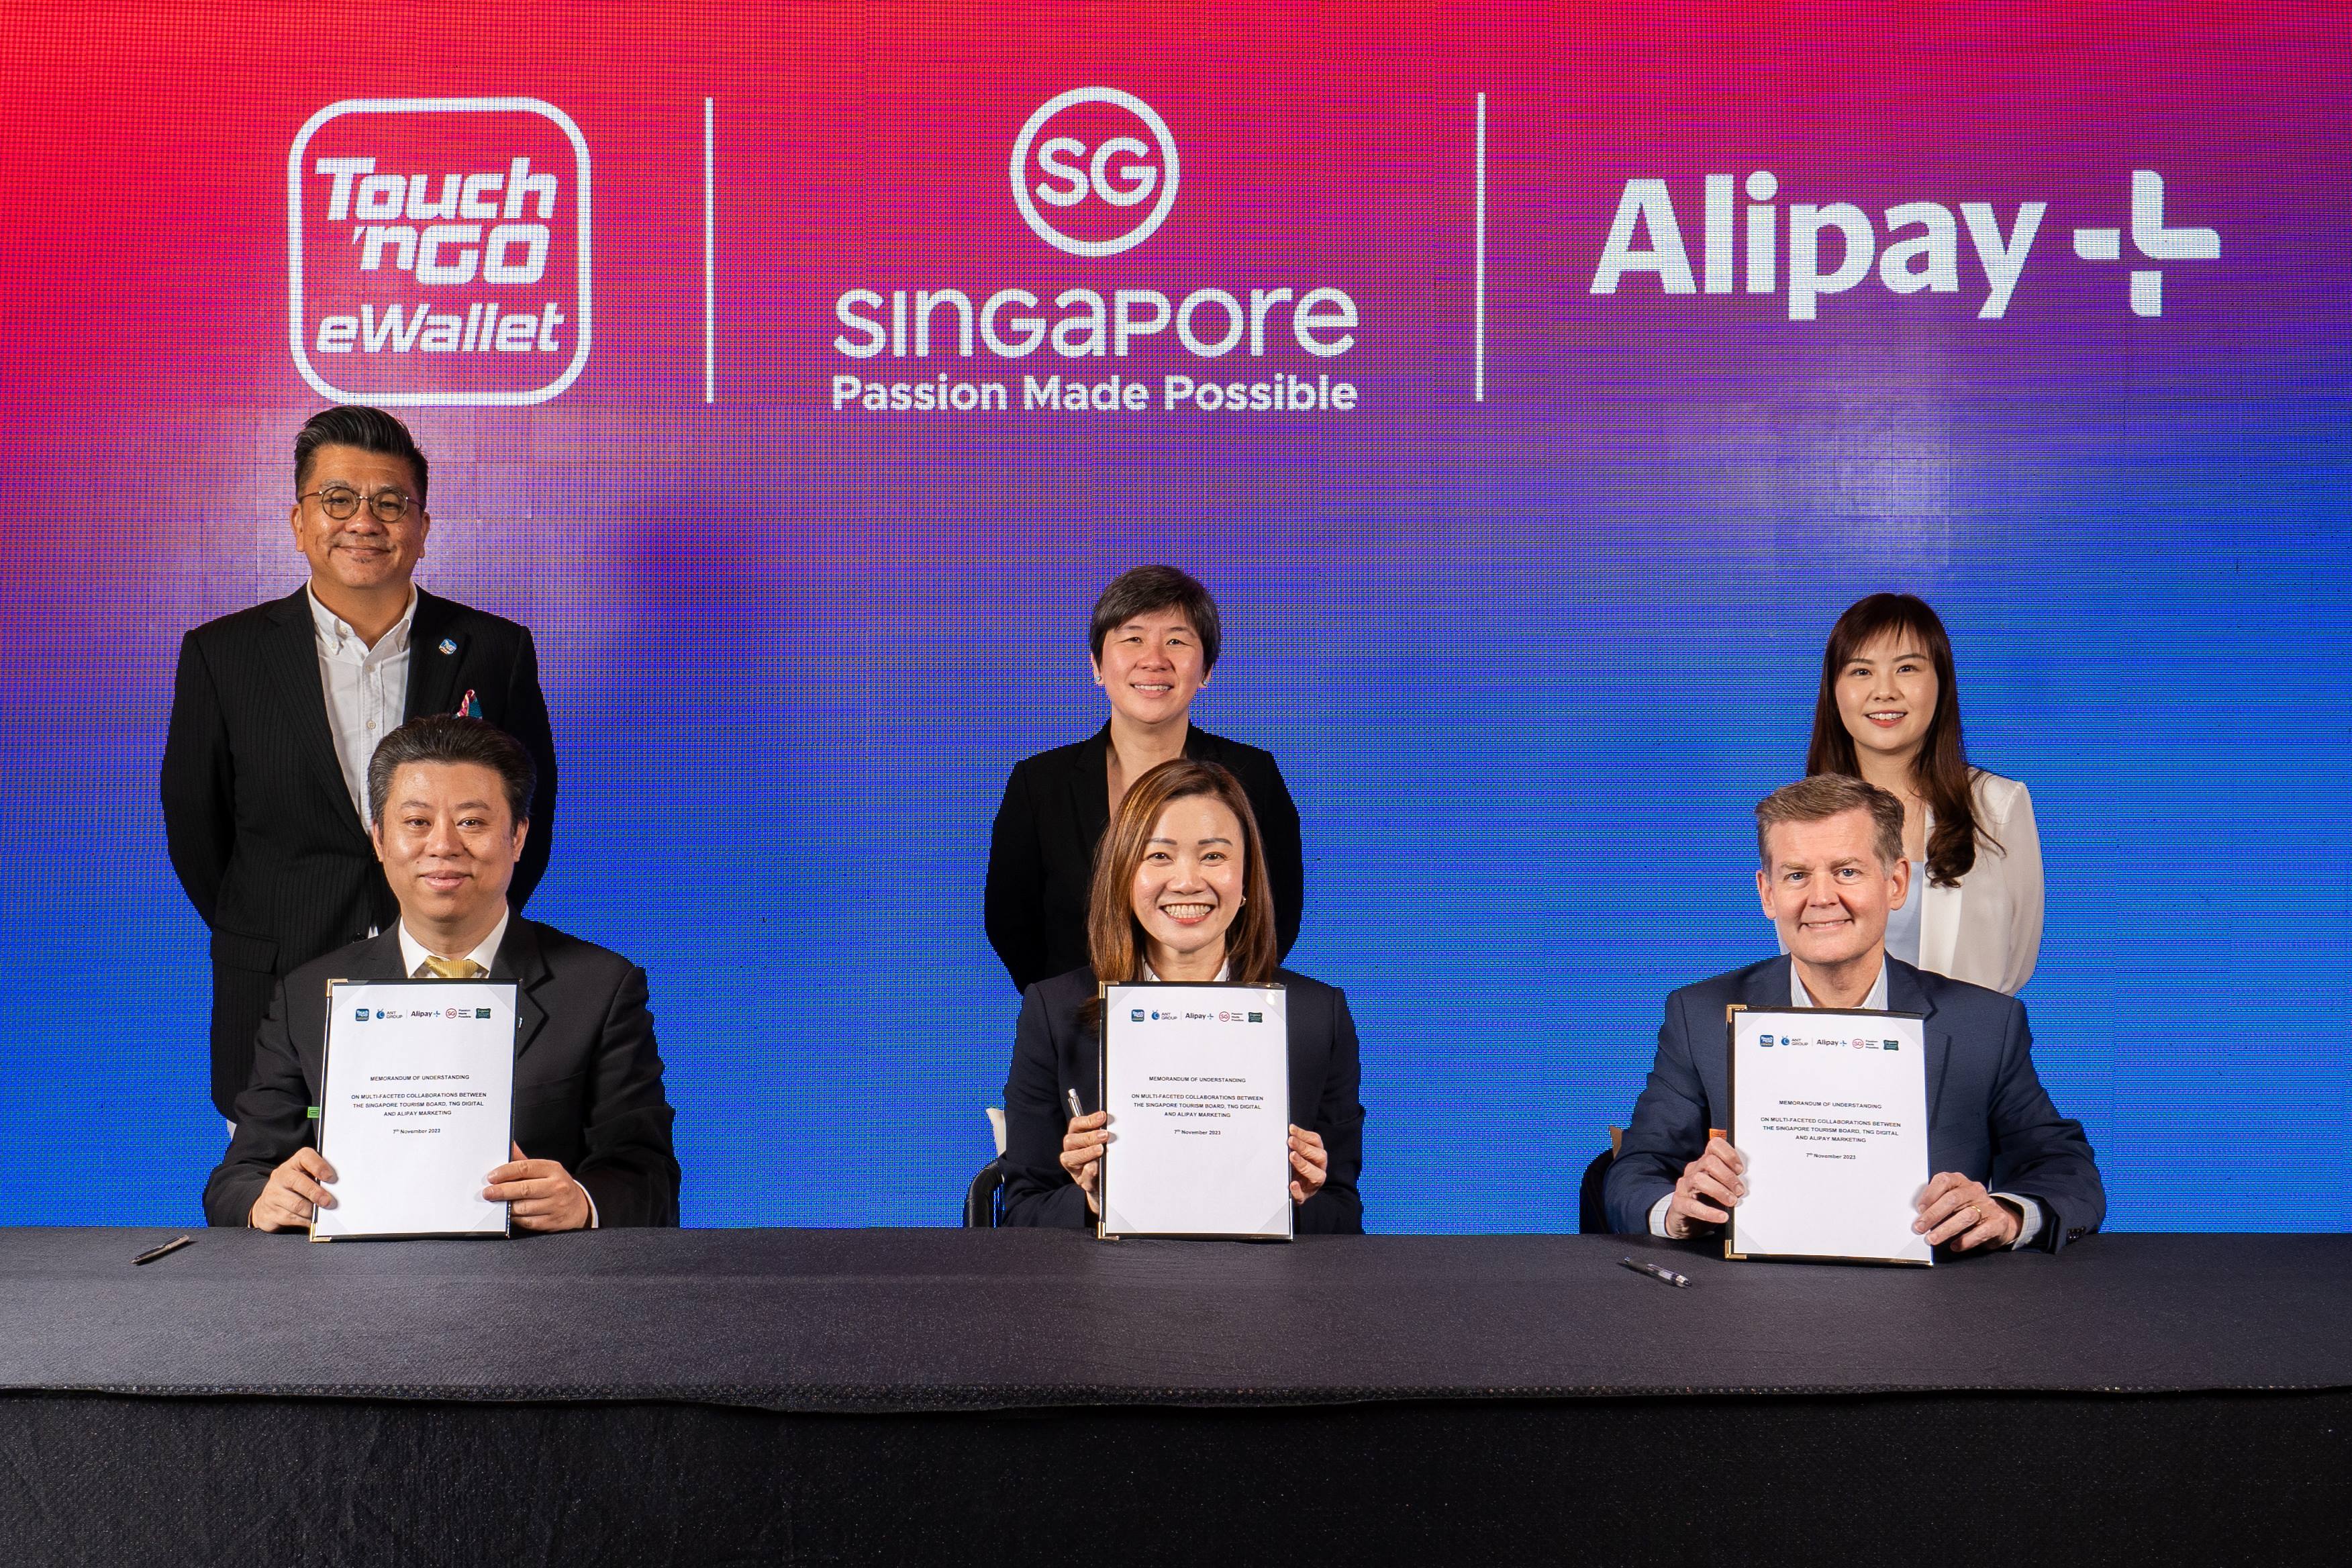 Singapore Tourism Board, TNG Digital and Alipay+ ink partnership to promote travel to Singapore